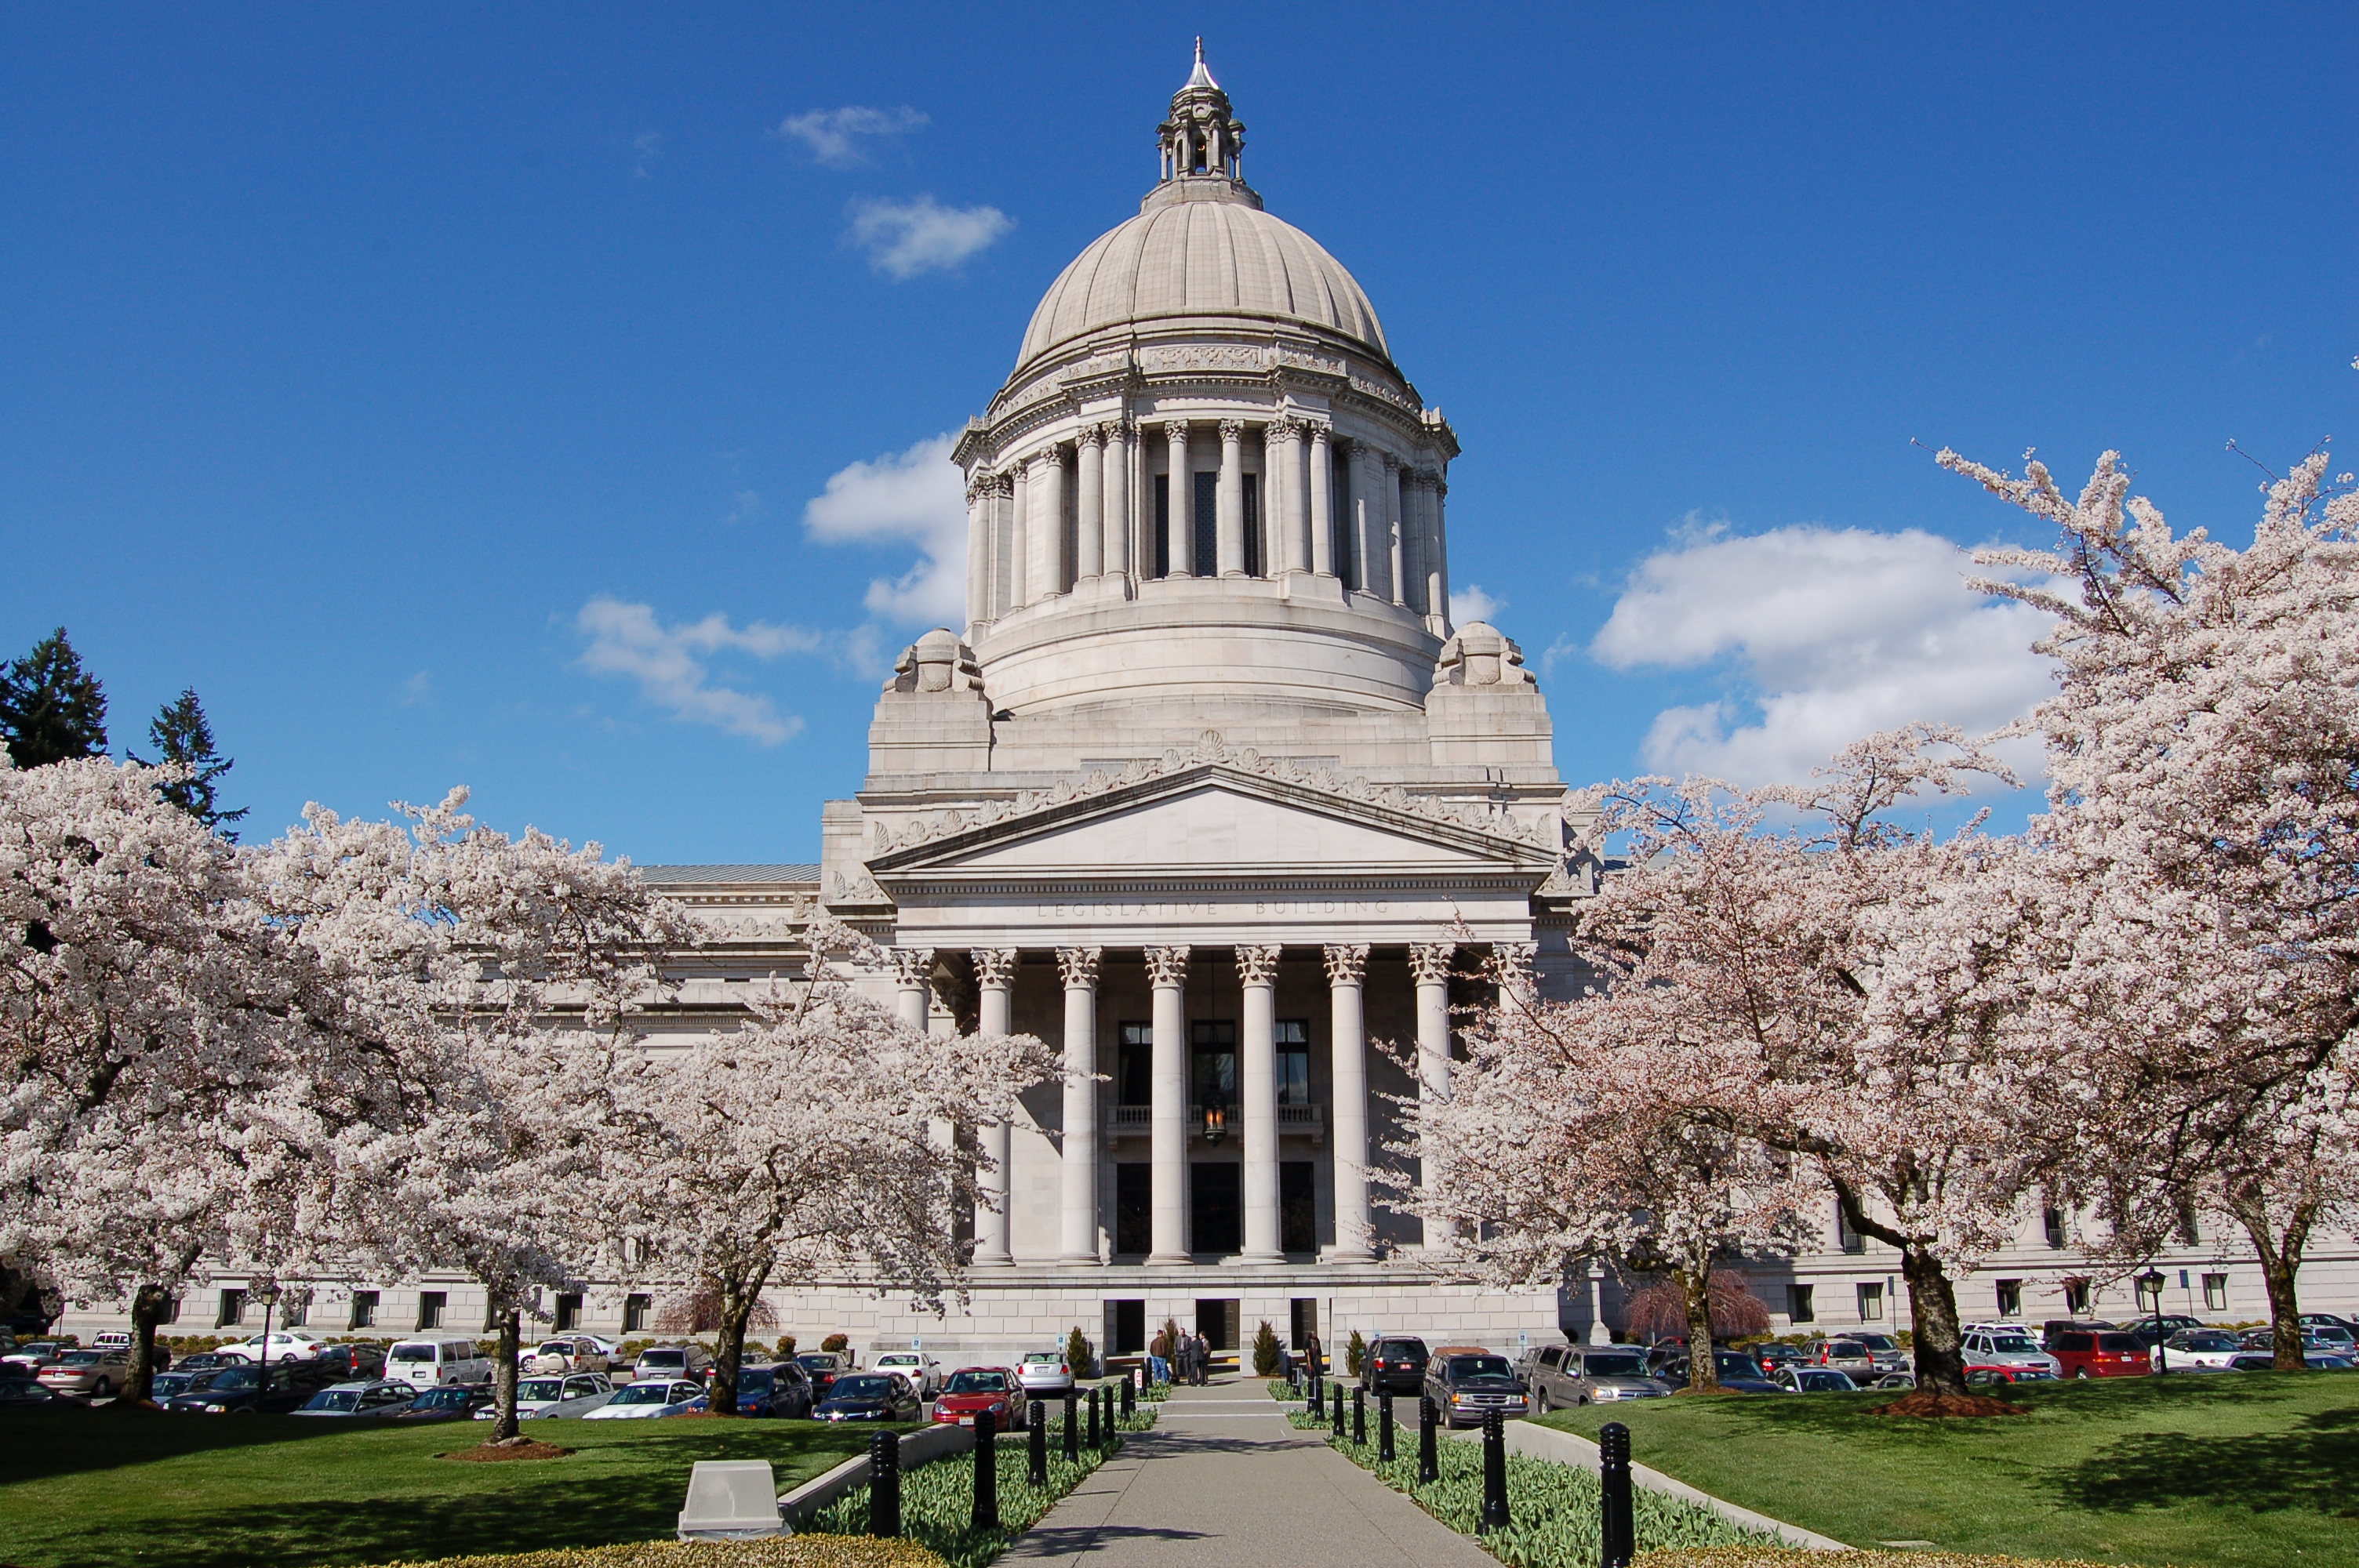 Photo of a classic white building with rotunda, blooming cherry trees in foreground, bright blue sky in background